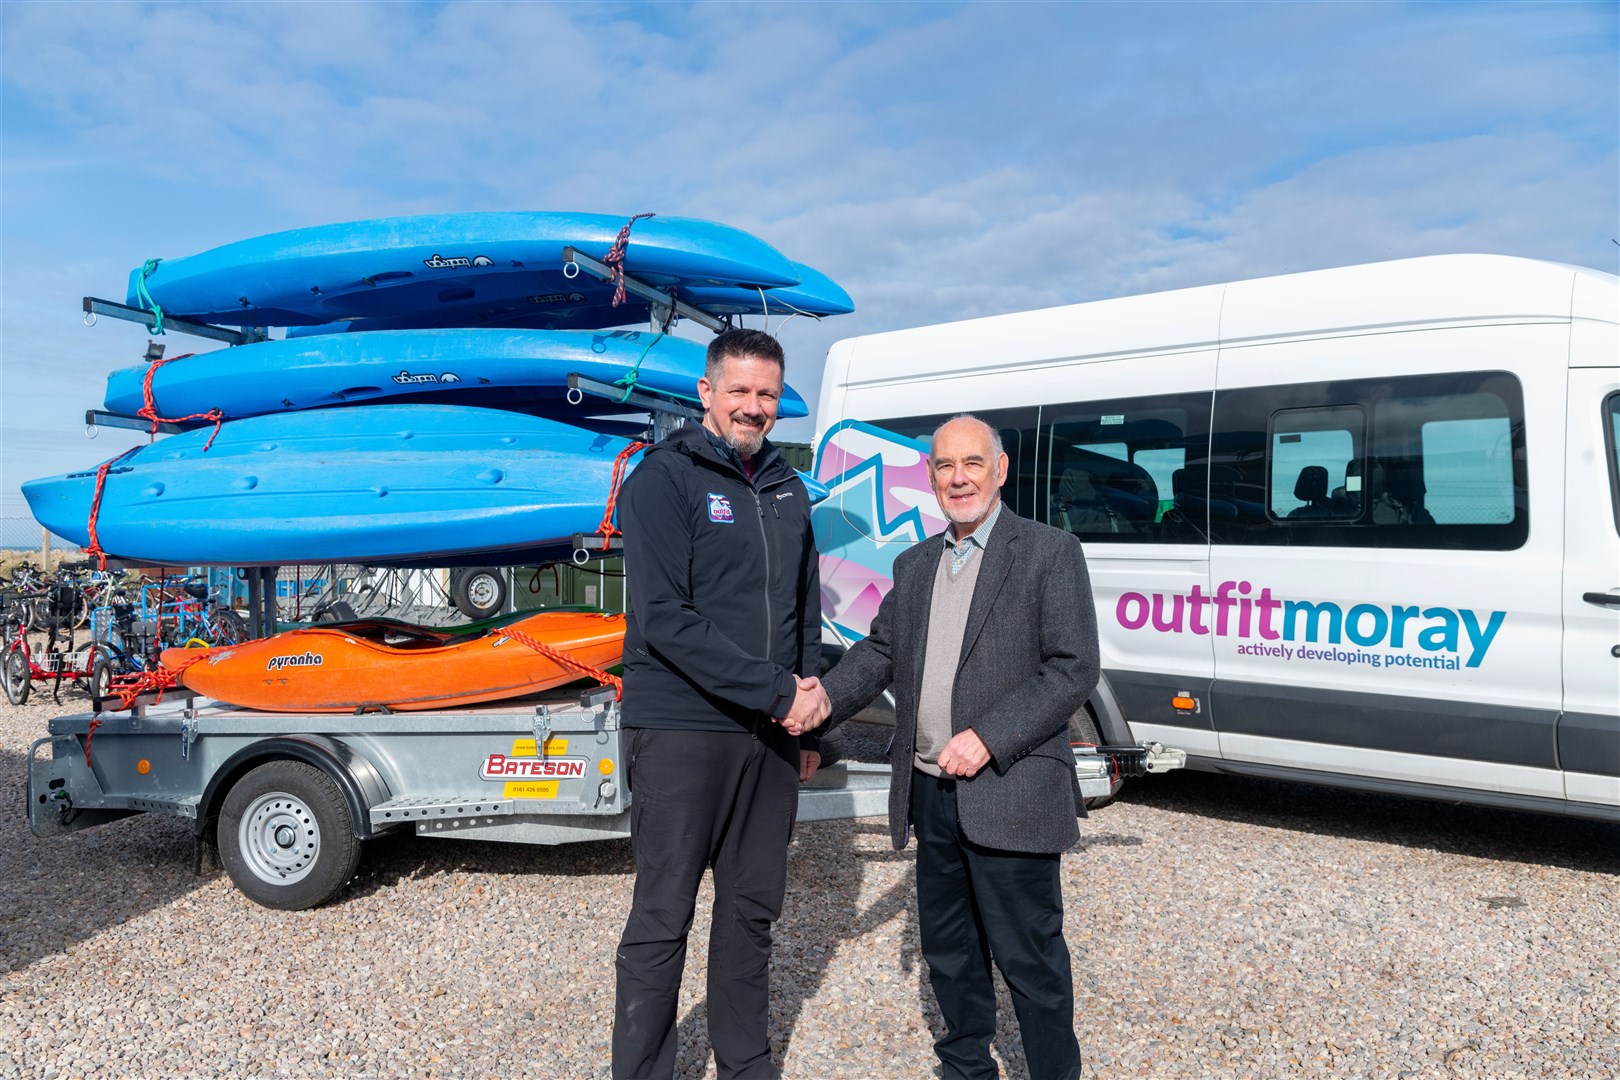 From left: Tony Brown (Chief Operating Officer at Outfit Moray) with George McIntrye (Chairman of The Gordon and Ena Baxter Foundation). Picture: Beth Taylor